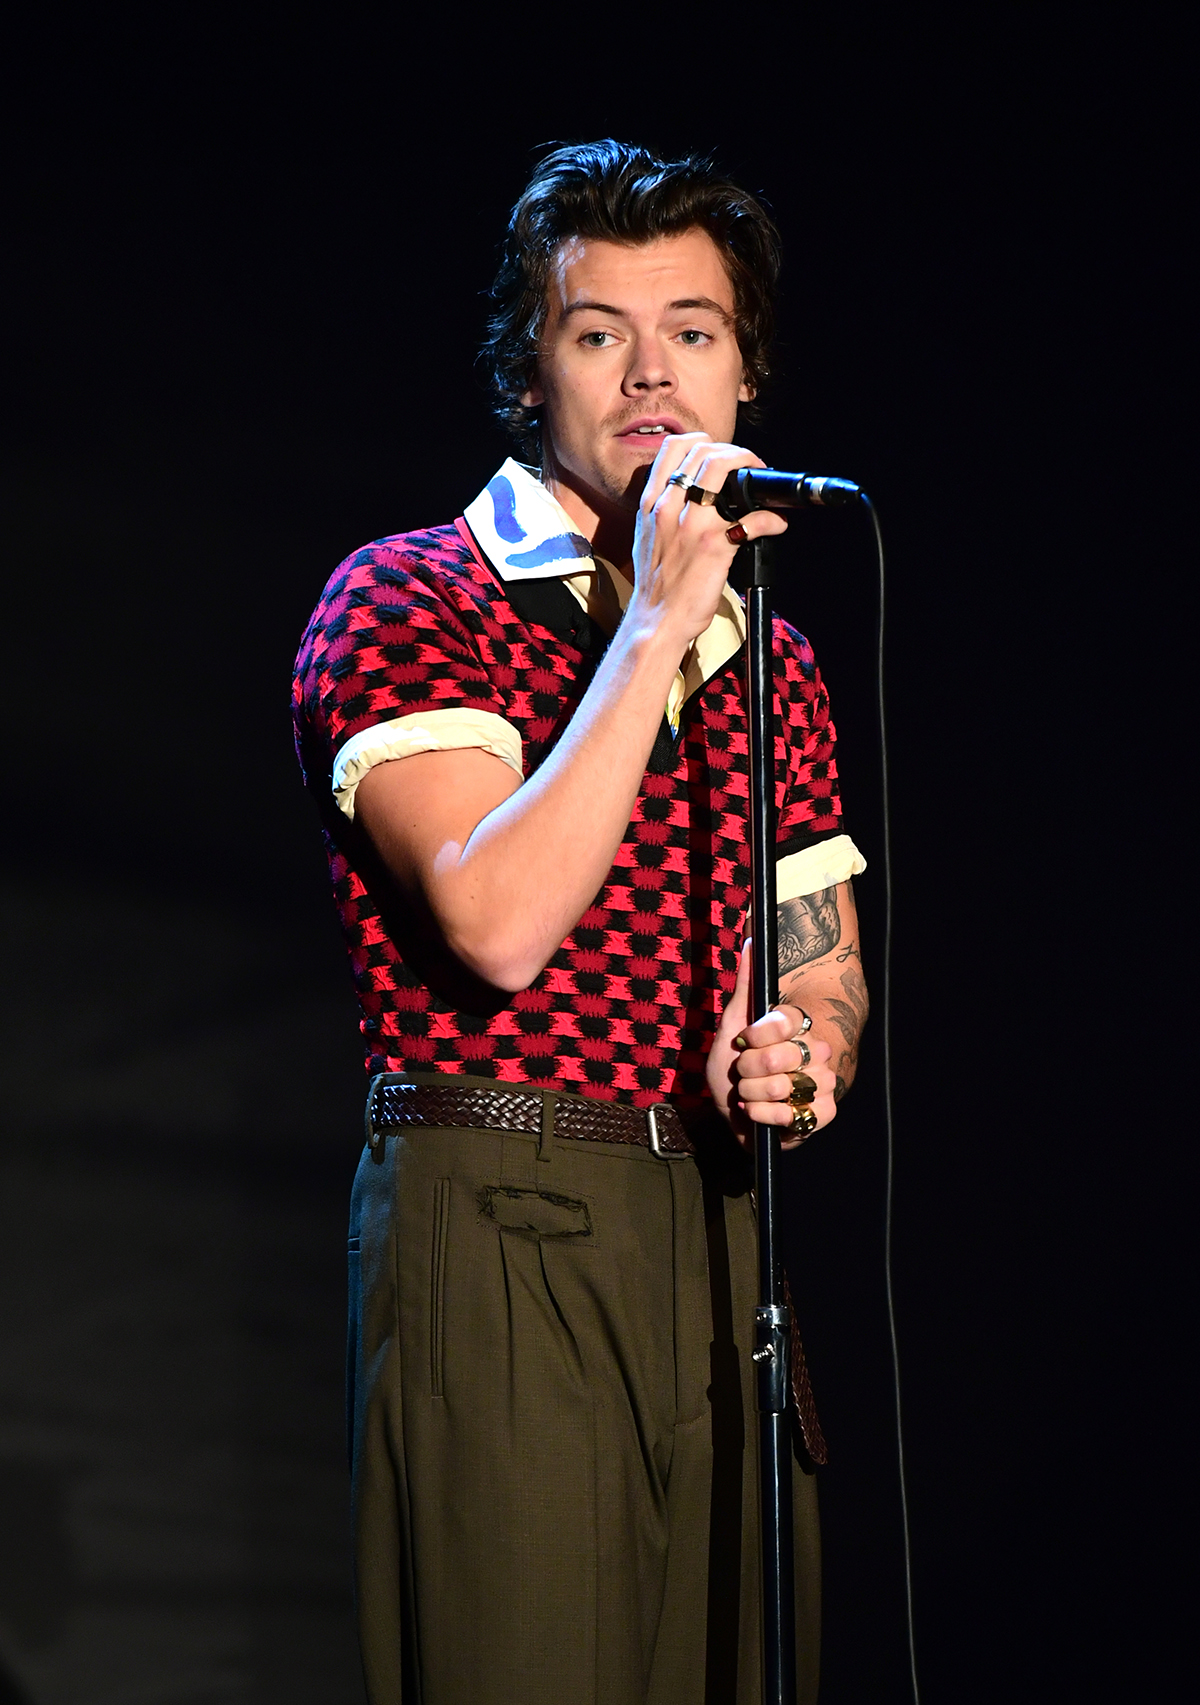 Harry Styles during the filming for the Graham Norton Show at BBC Studioworks 6 Television Centre, Wood Lane, London, to be aired on BBC One on Friday evening. Picture date: Thursday December 5, 2019. Photo credit should read: PA Images on behalf of So TV (Photo by Ian West/PA Images via Getty Images)